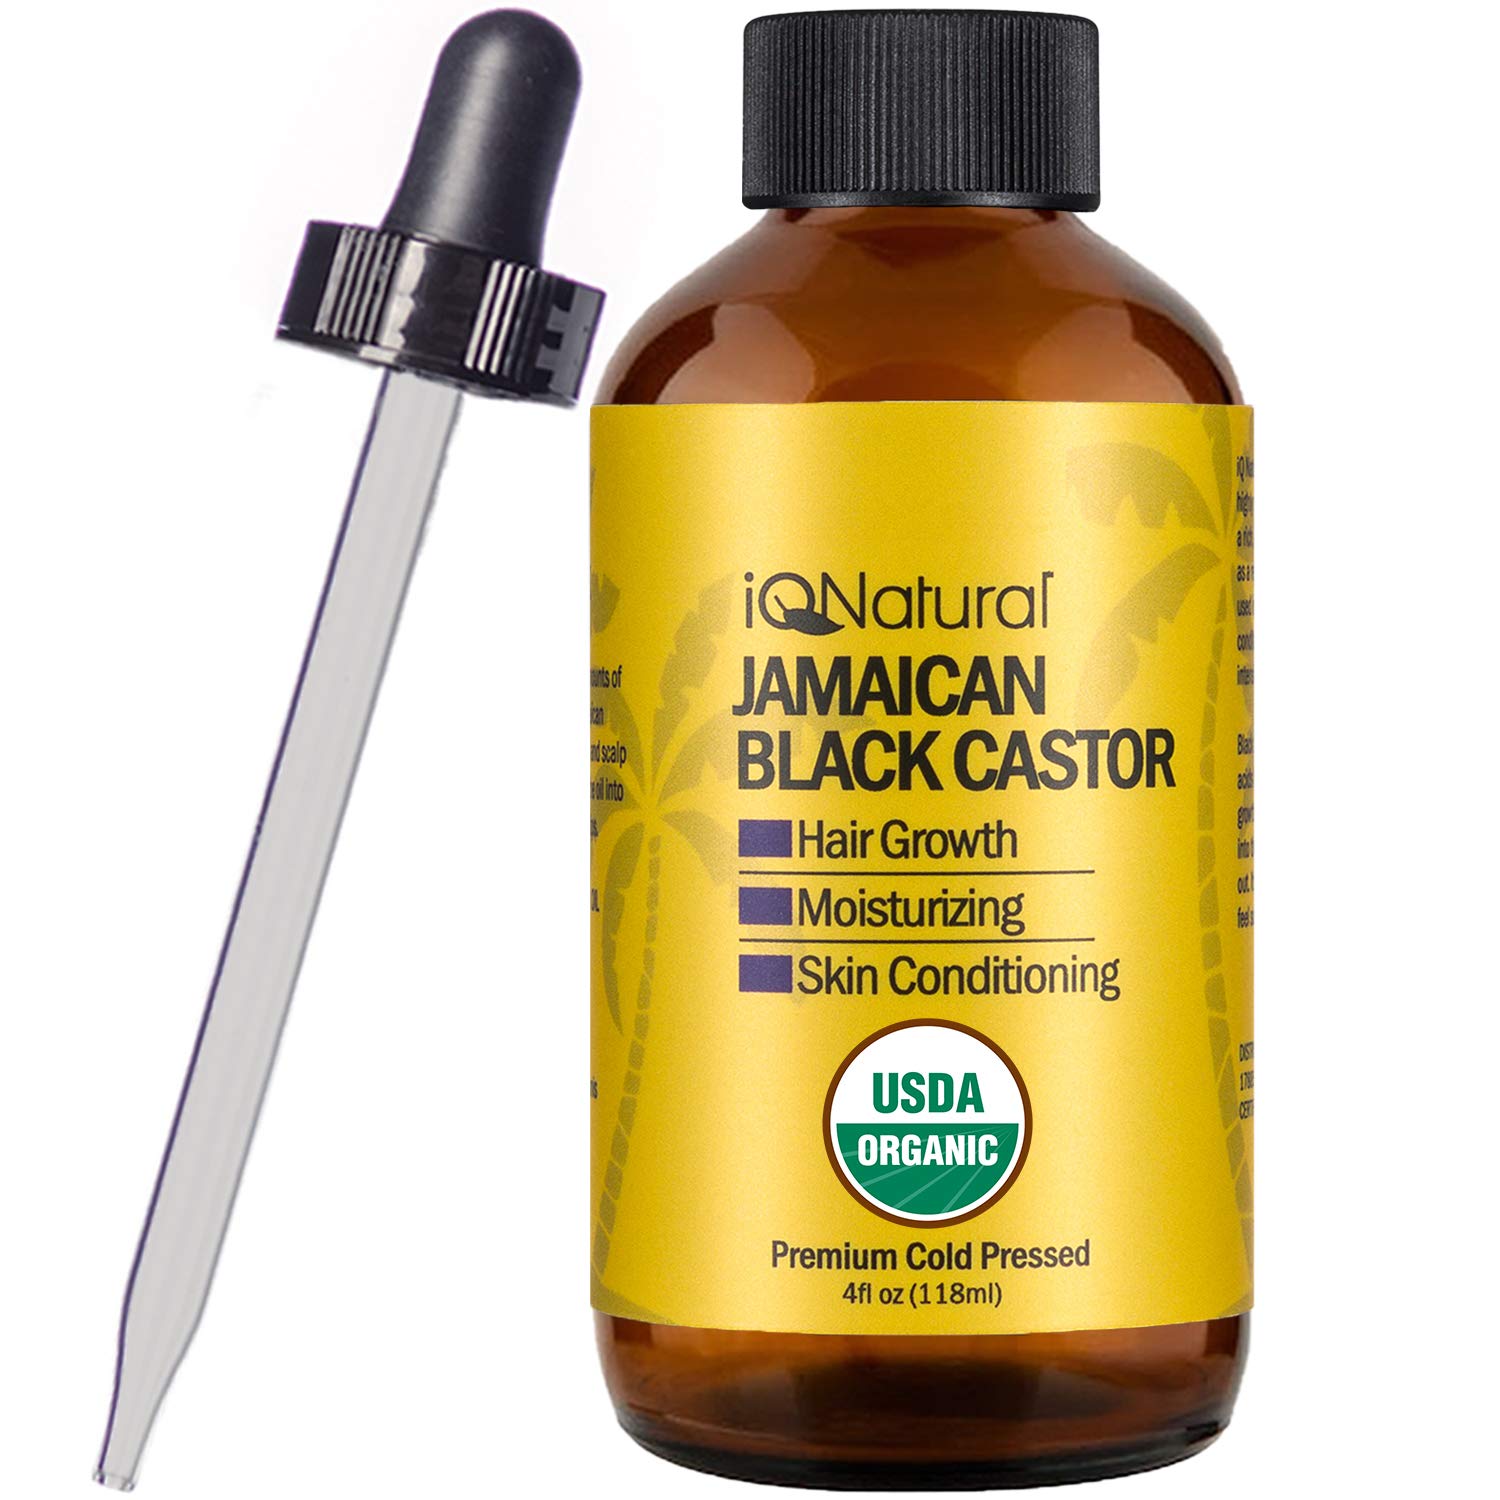 Jamaican Black Castor Oil USDA Certified Organic for Hair Growth and Skin Conditioning